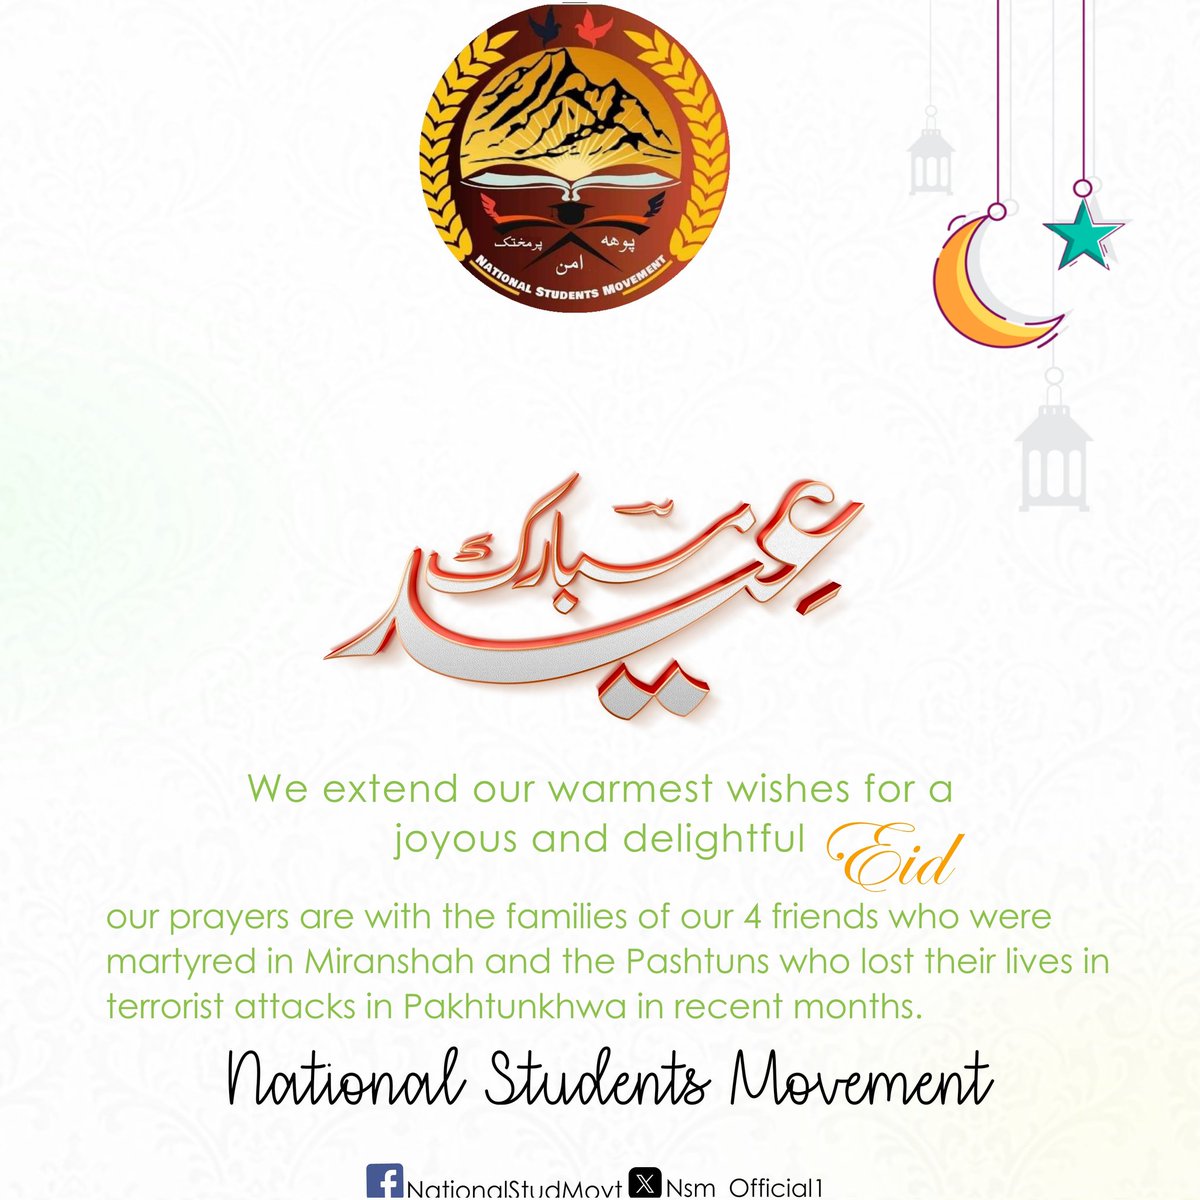 We extend our warmest wishes for a joyous and delightful Eid .
Our prayers are with the families of our 4 friends who were martyred in Miranshah and the Pashtuns who lost their lives in terrorist attacks in Pakhtunkhwa in recent months.
Regards 
National Students Movement